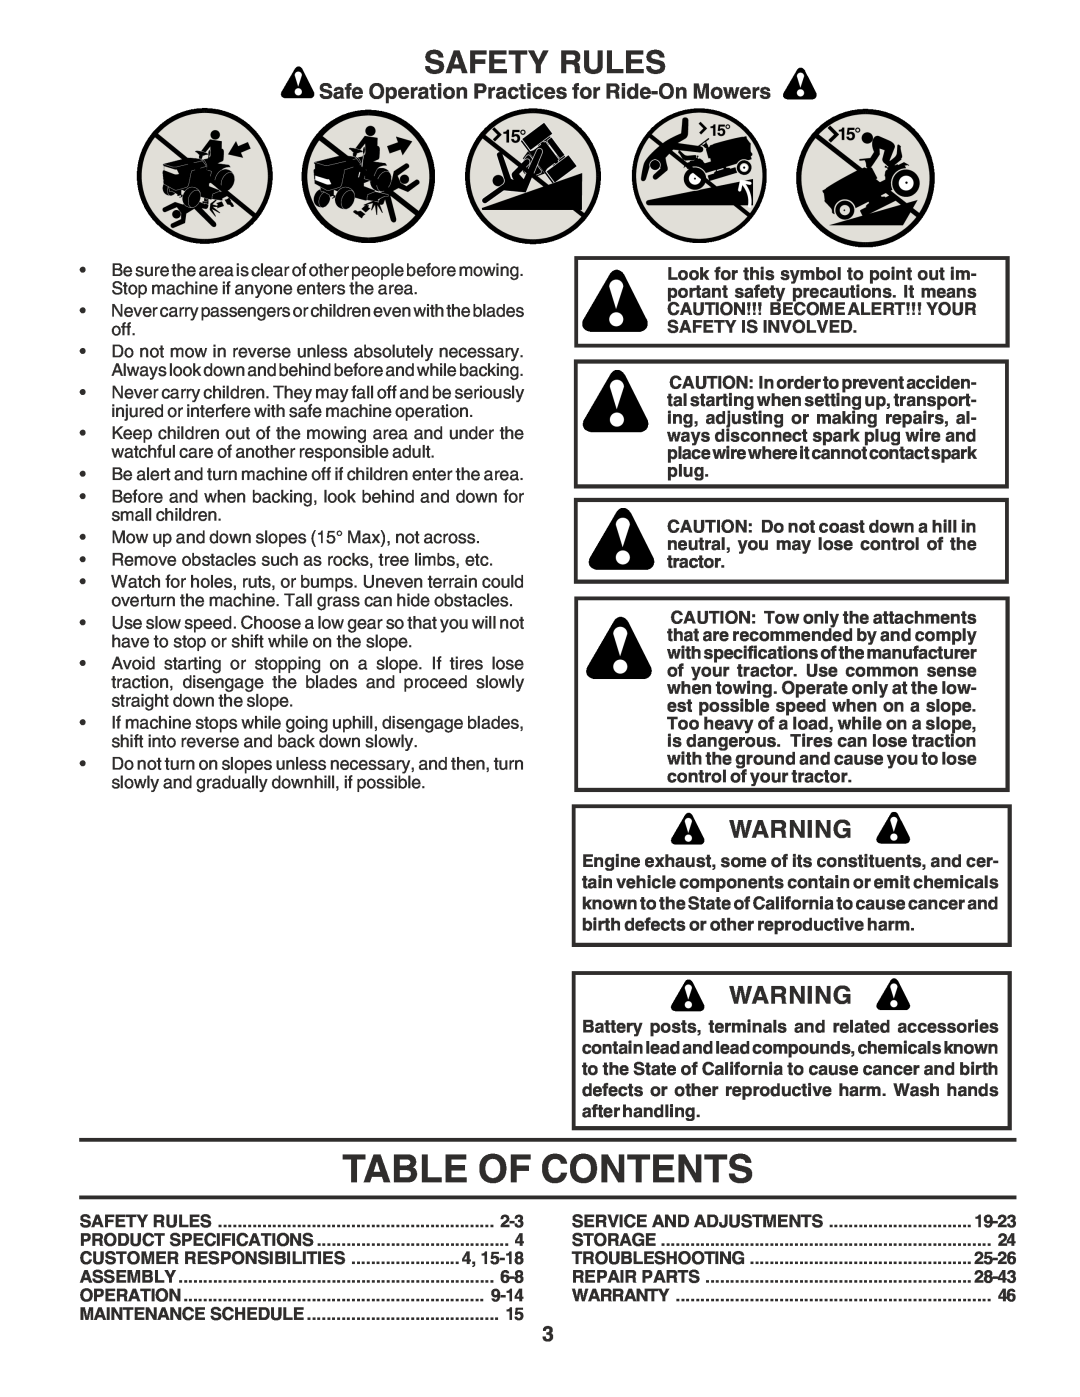 Poulan 181377 Table Of Contents, Safety Rules, Safe Operation Practices for Ride-On Mowers, 9-14, 19-23, 25-26, 28-43 